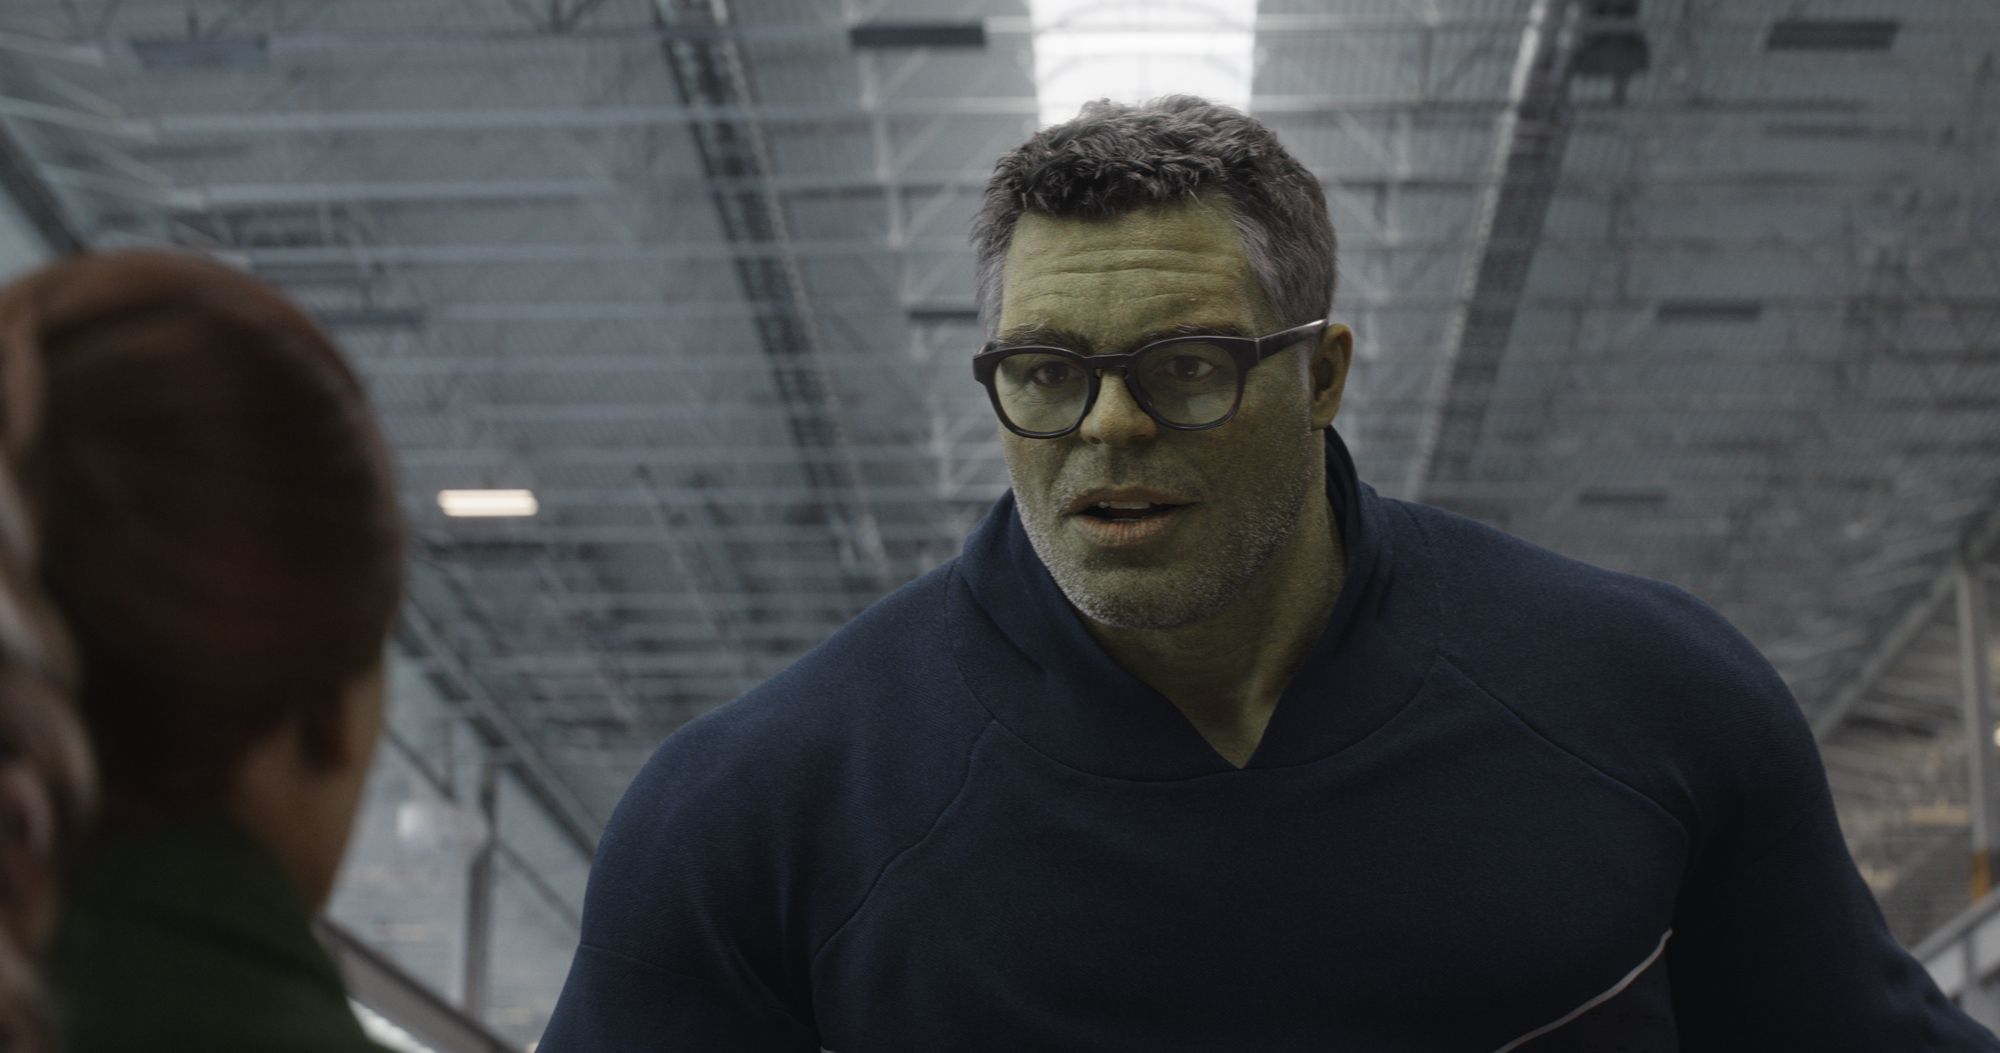 Avengers: Endgame Behind-the-Scenes Images Reveal How Smart Hulk Was Made | Collider